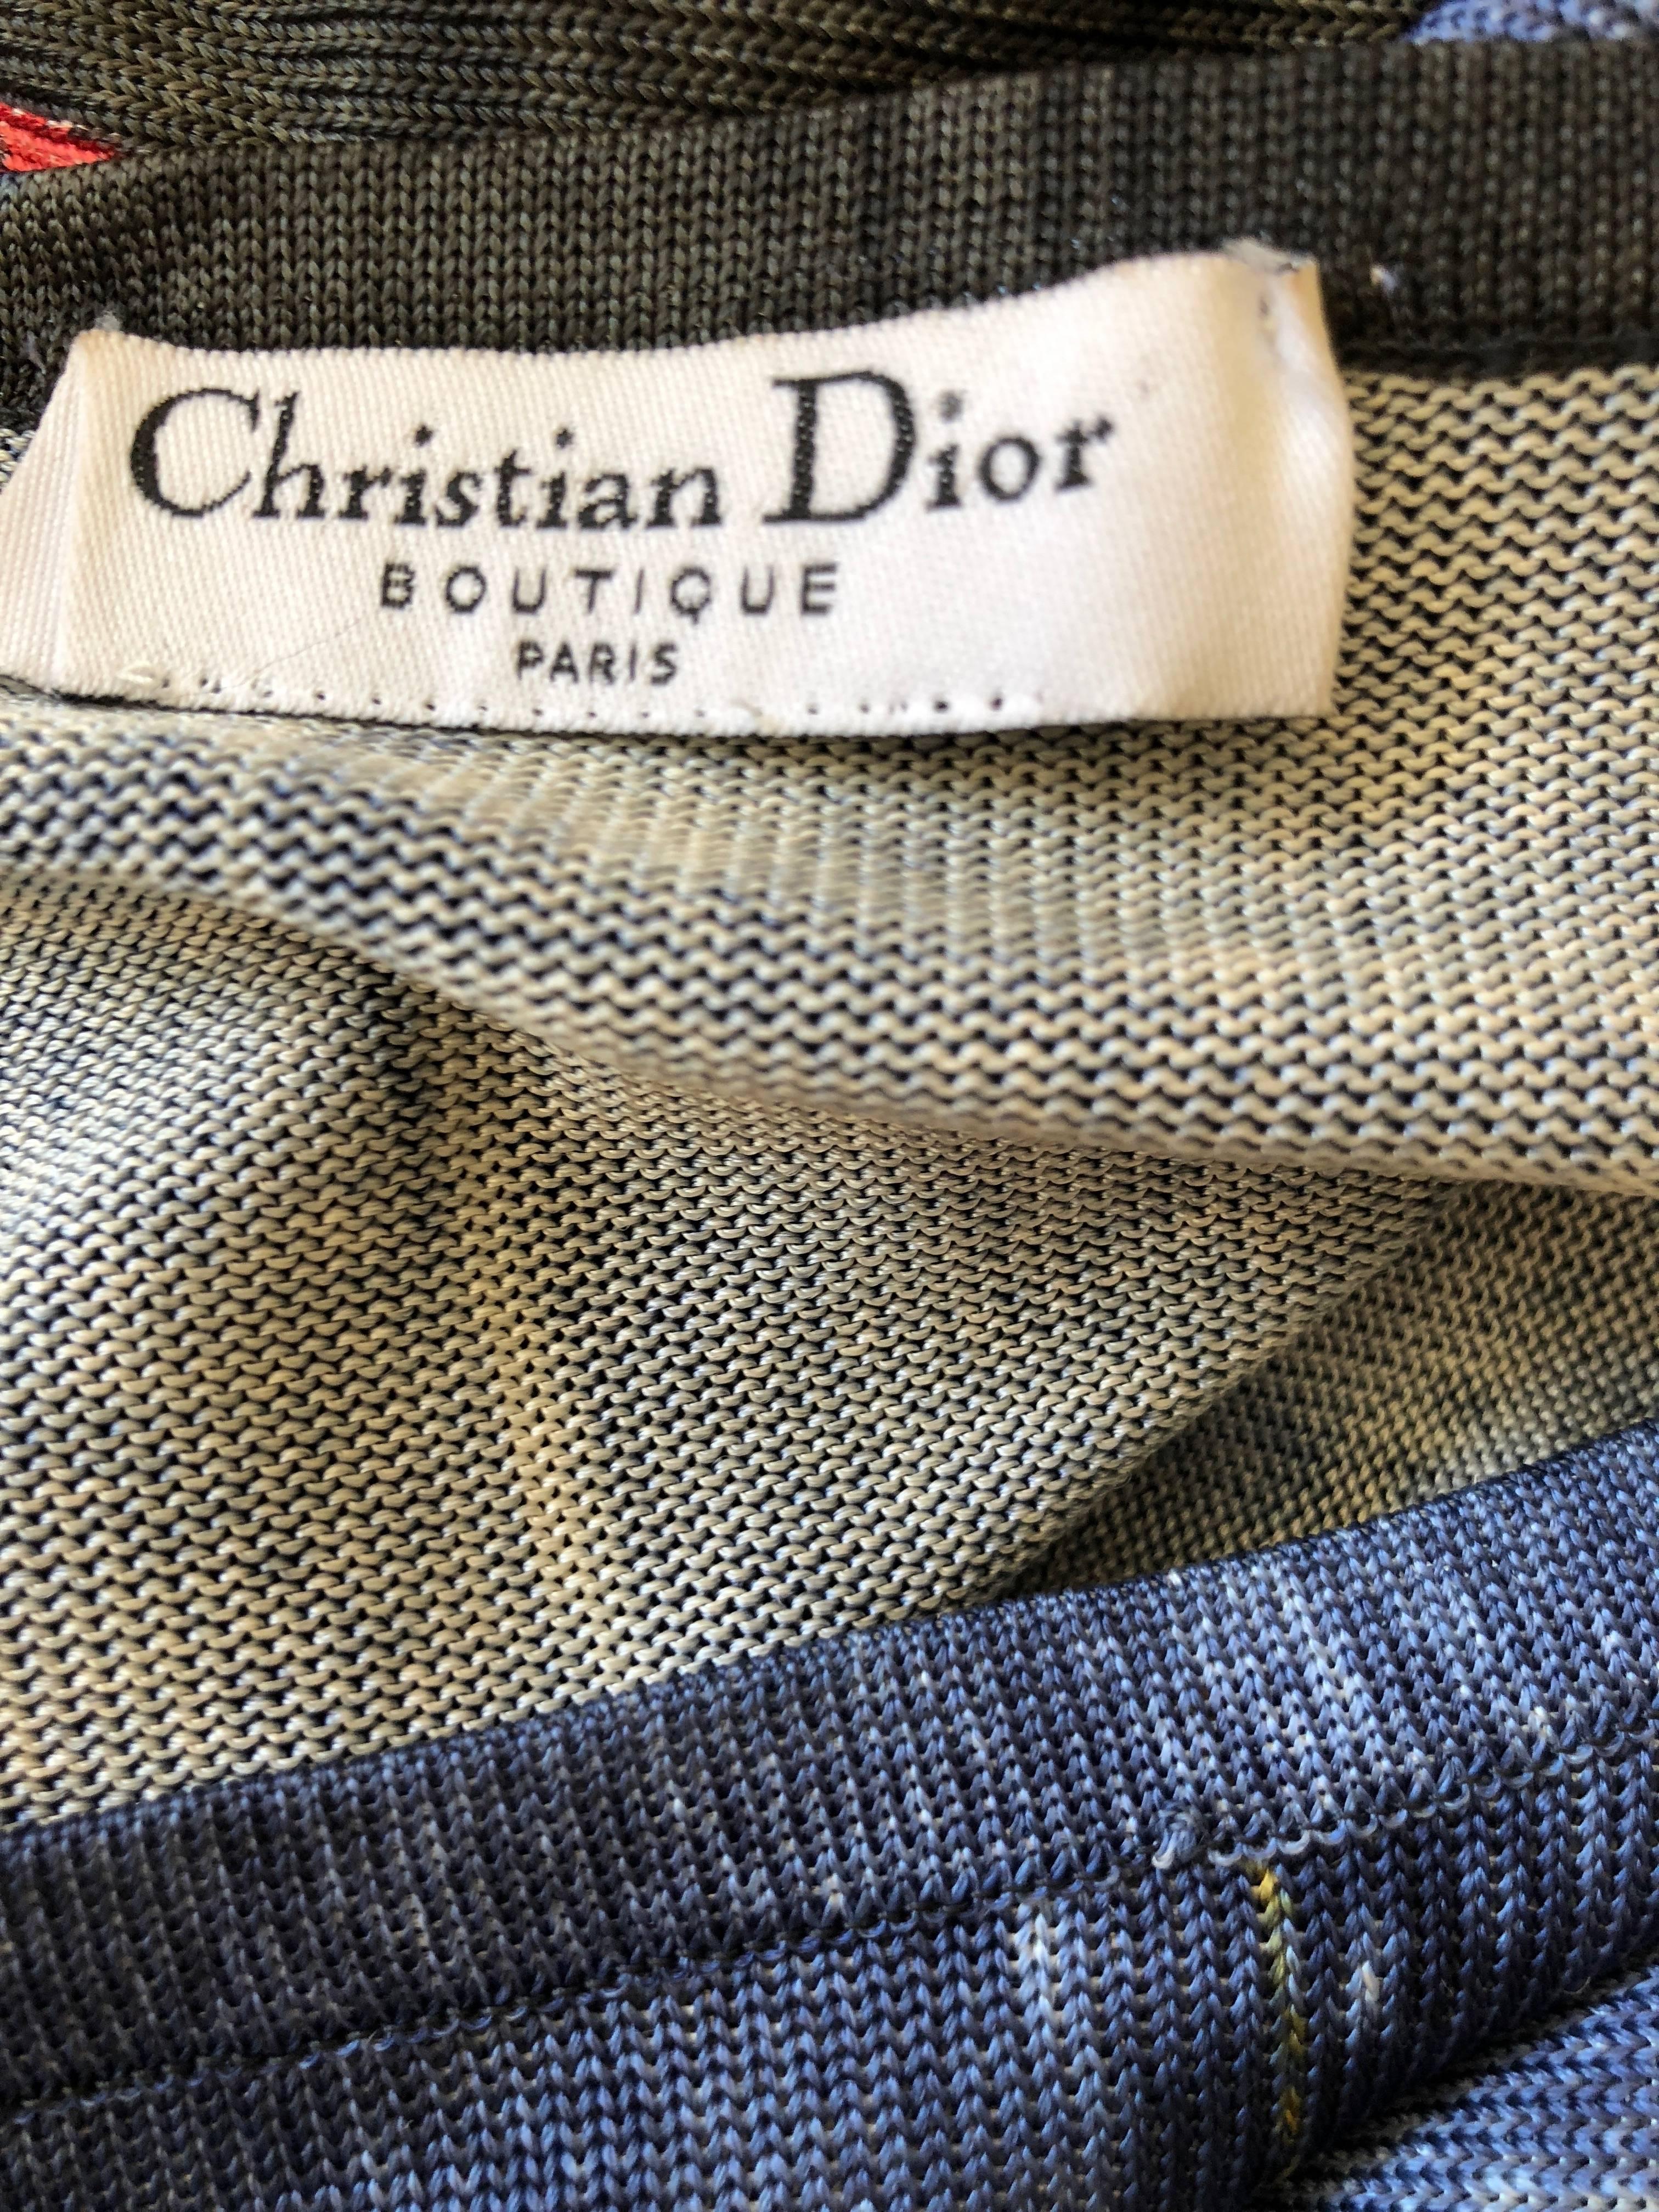 Christian Dior by John Galliano knit top with trompe l'oeill denim with patches including"  I Heart Sex "
Bust 34"
Waist 28"
Length 21"
Excellent condition